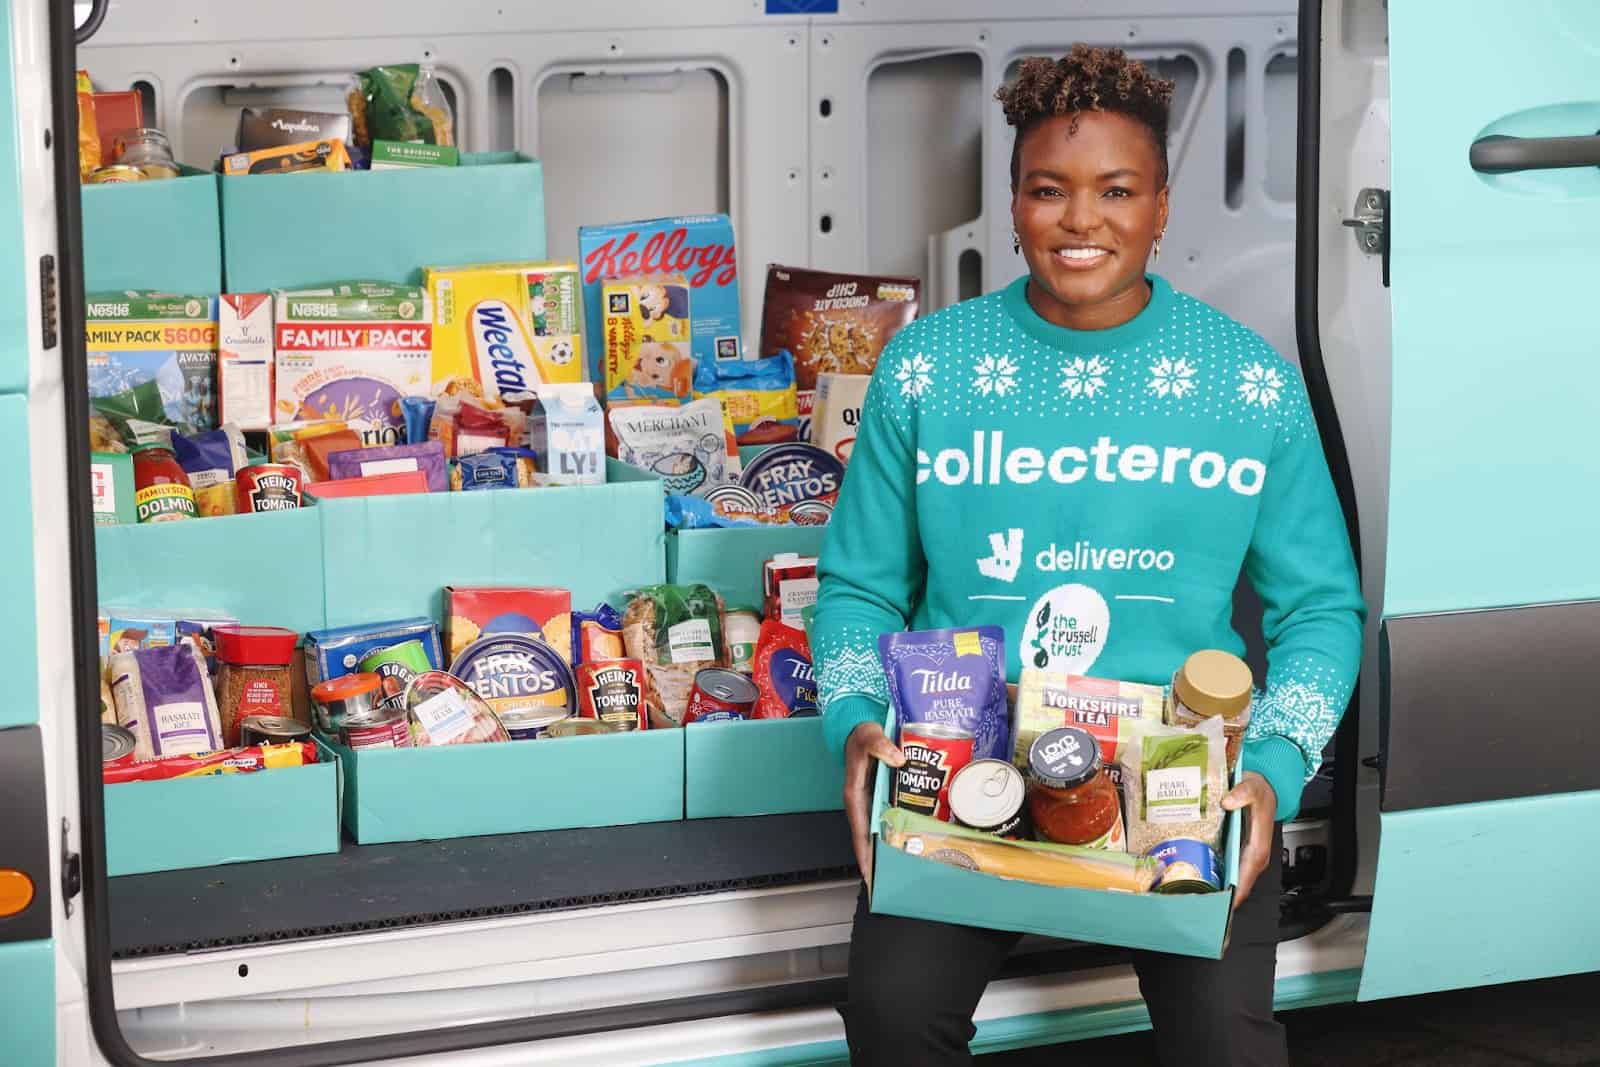 Food bank collection service launched by Deliveroo in partnership with the Trussell Trust